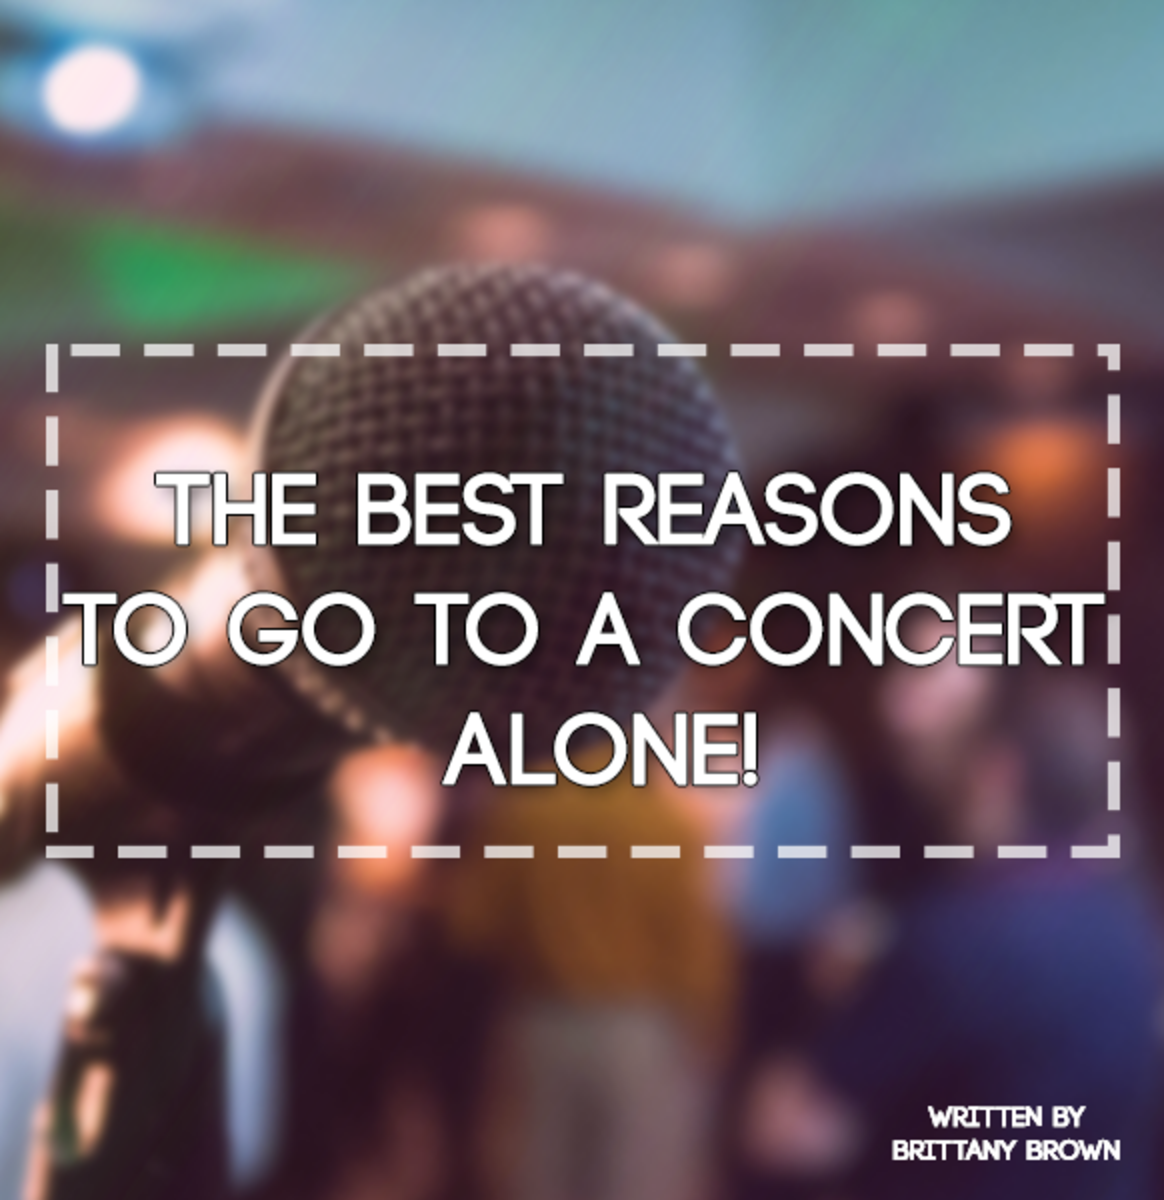 The Six Best Things About Going to a Concert Alone!